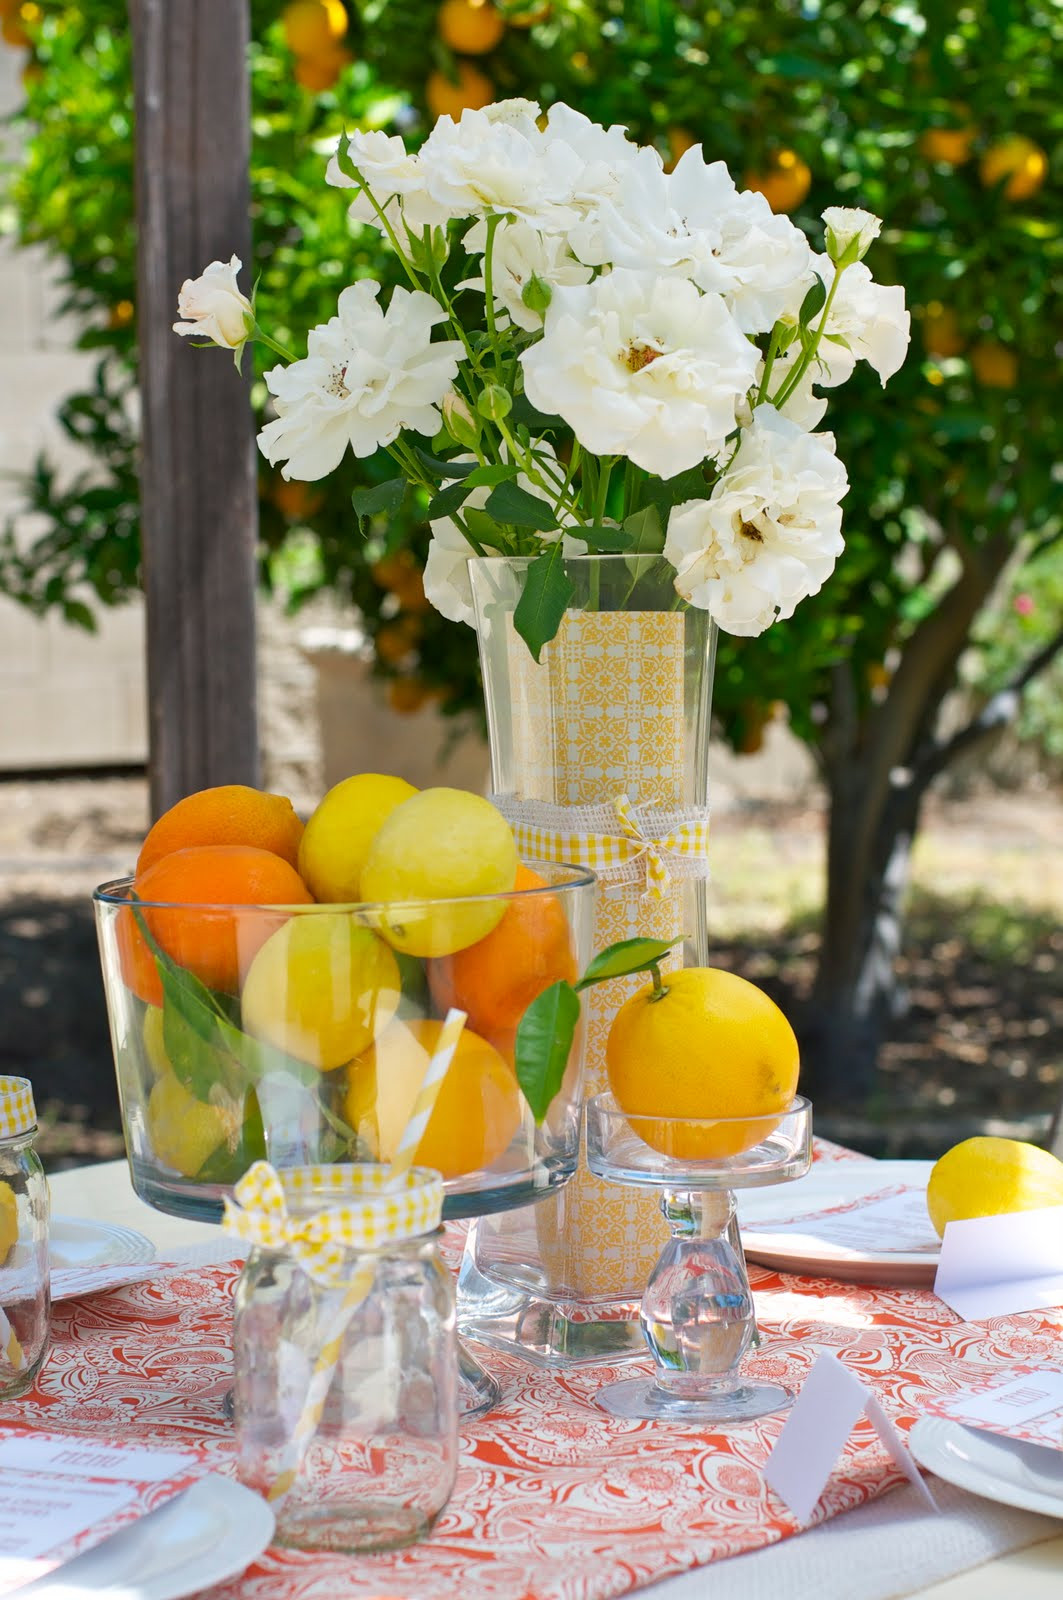 Decorating Ideas For A Summer Party
 Summer Party Ideas